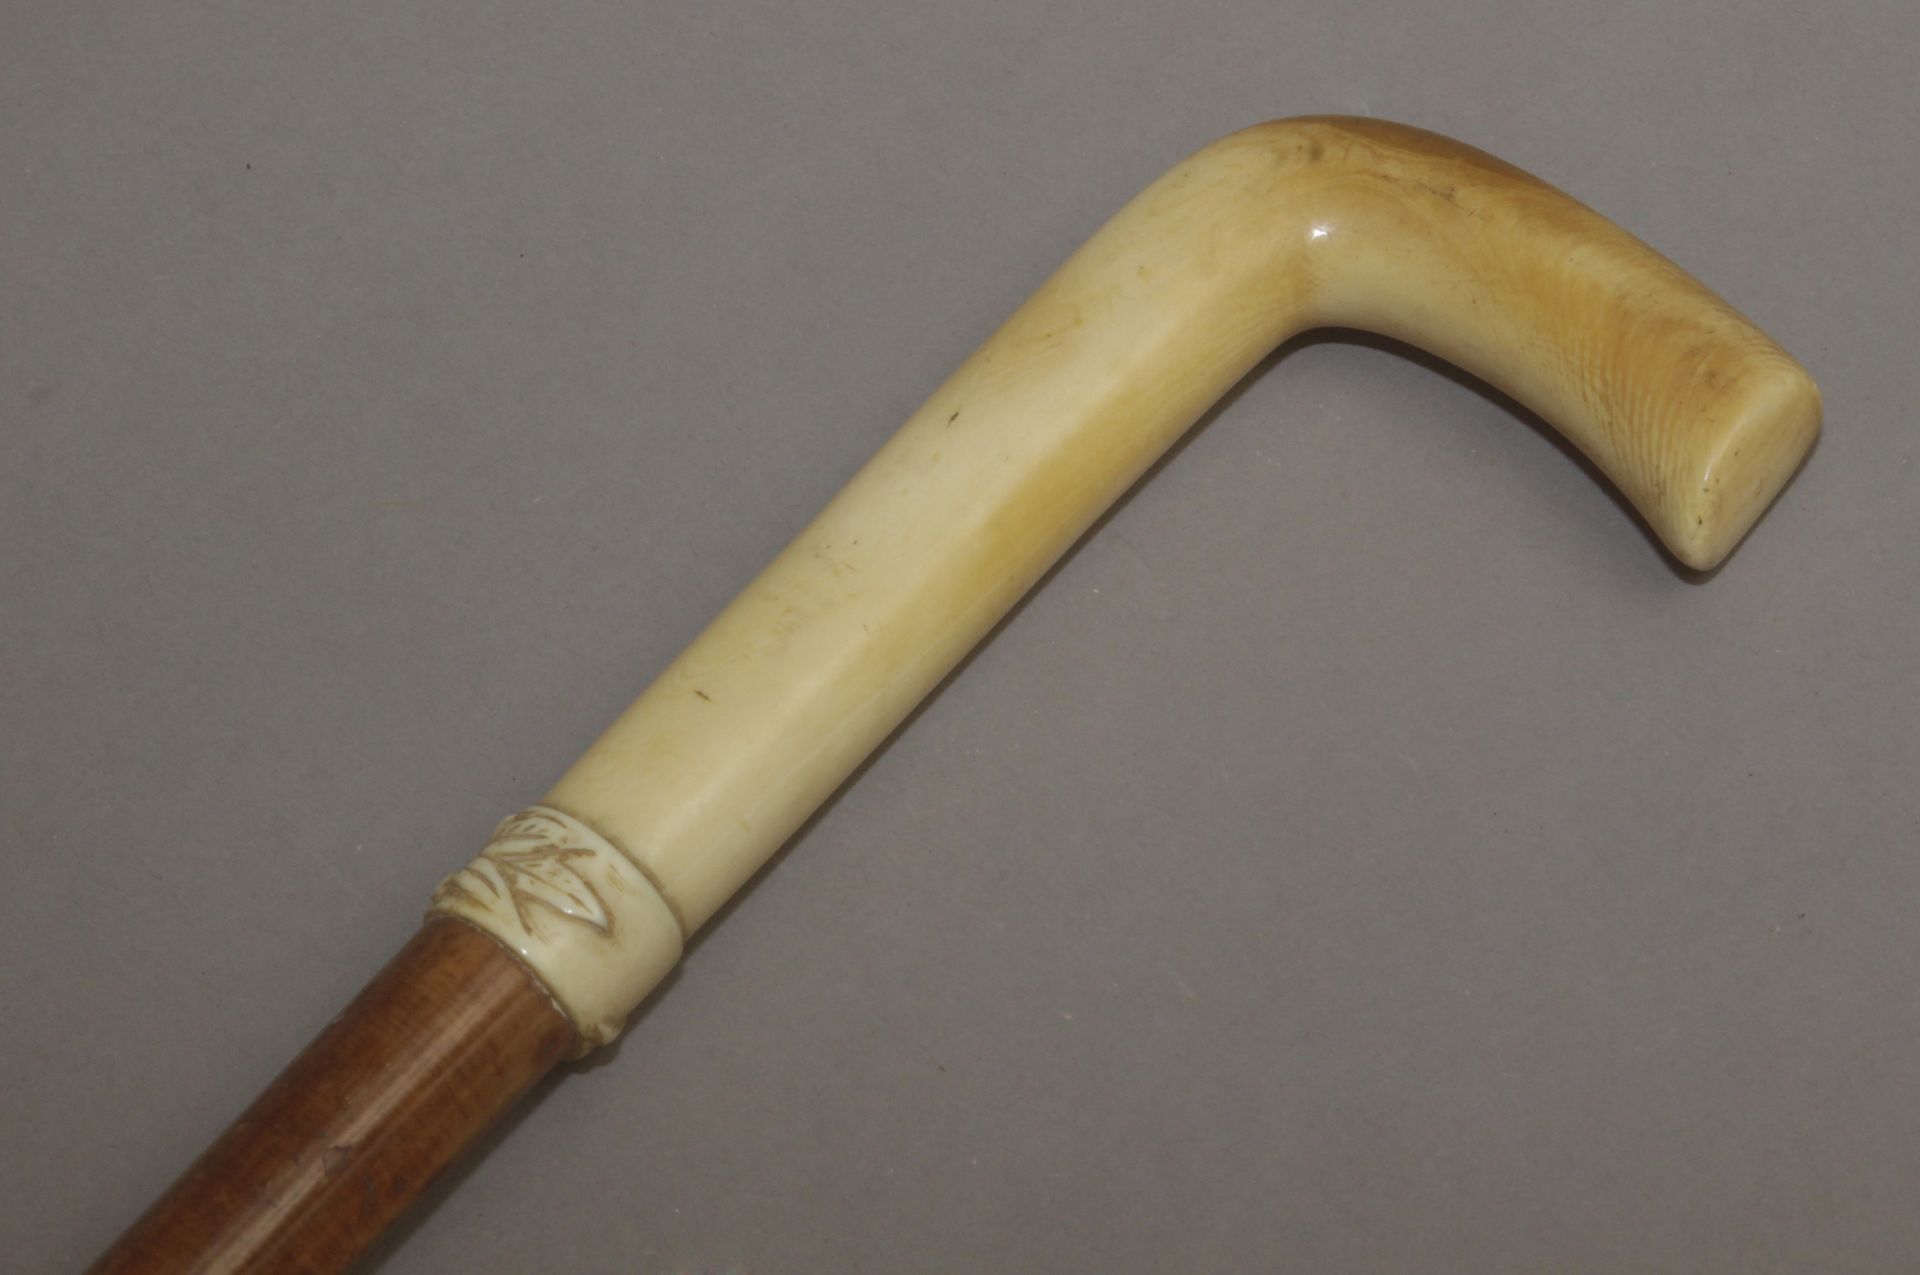 A first half of 20th century walking stick